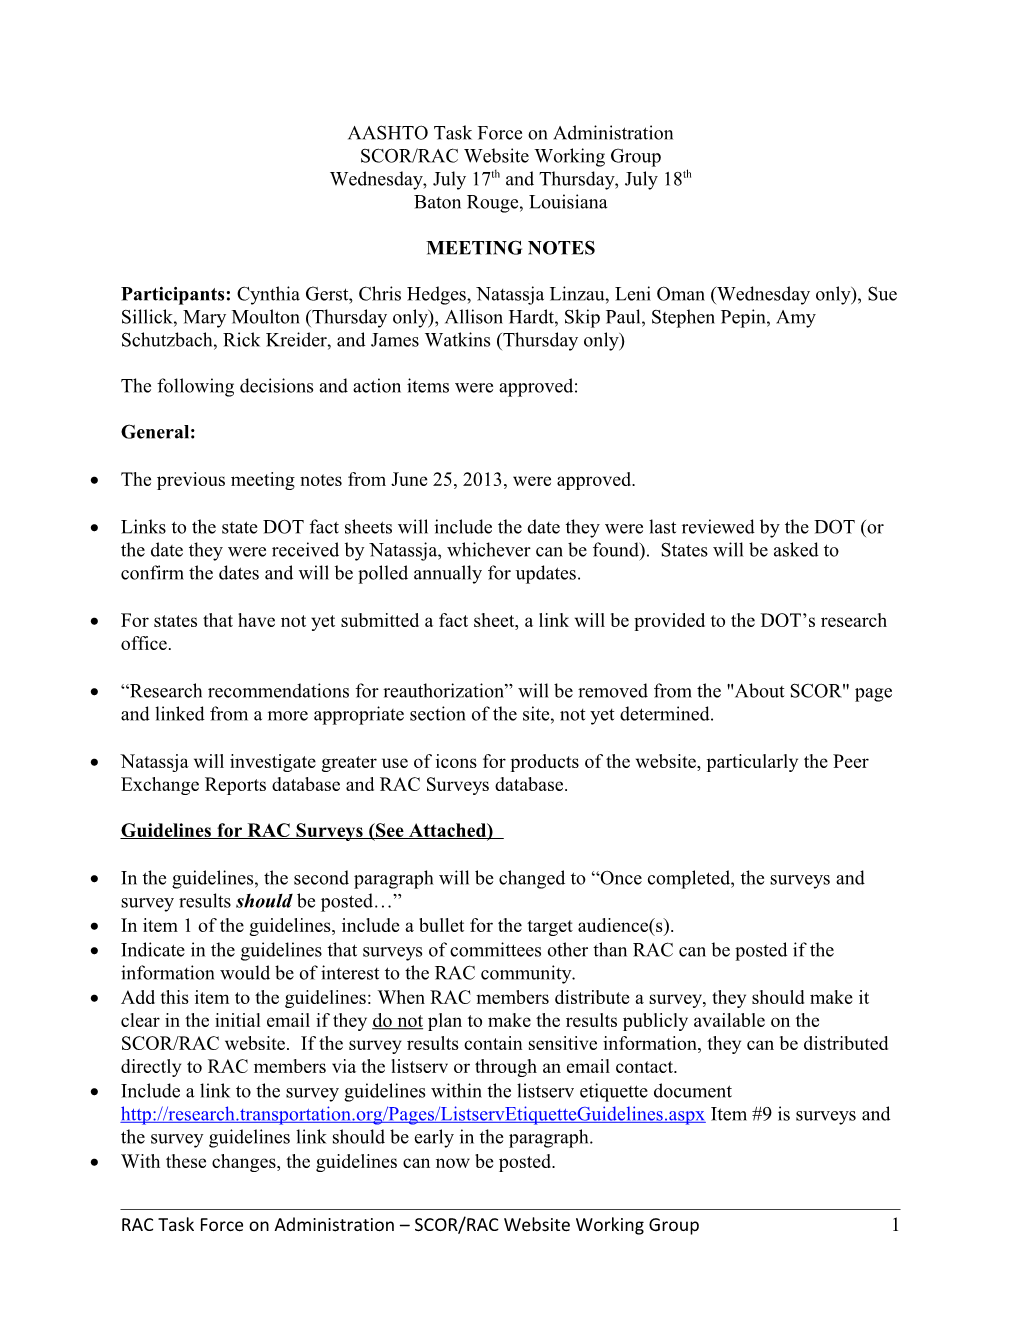 Admin TF Web Subcommittee Meeting Notes: July 17 and 18, 2013